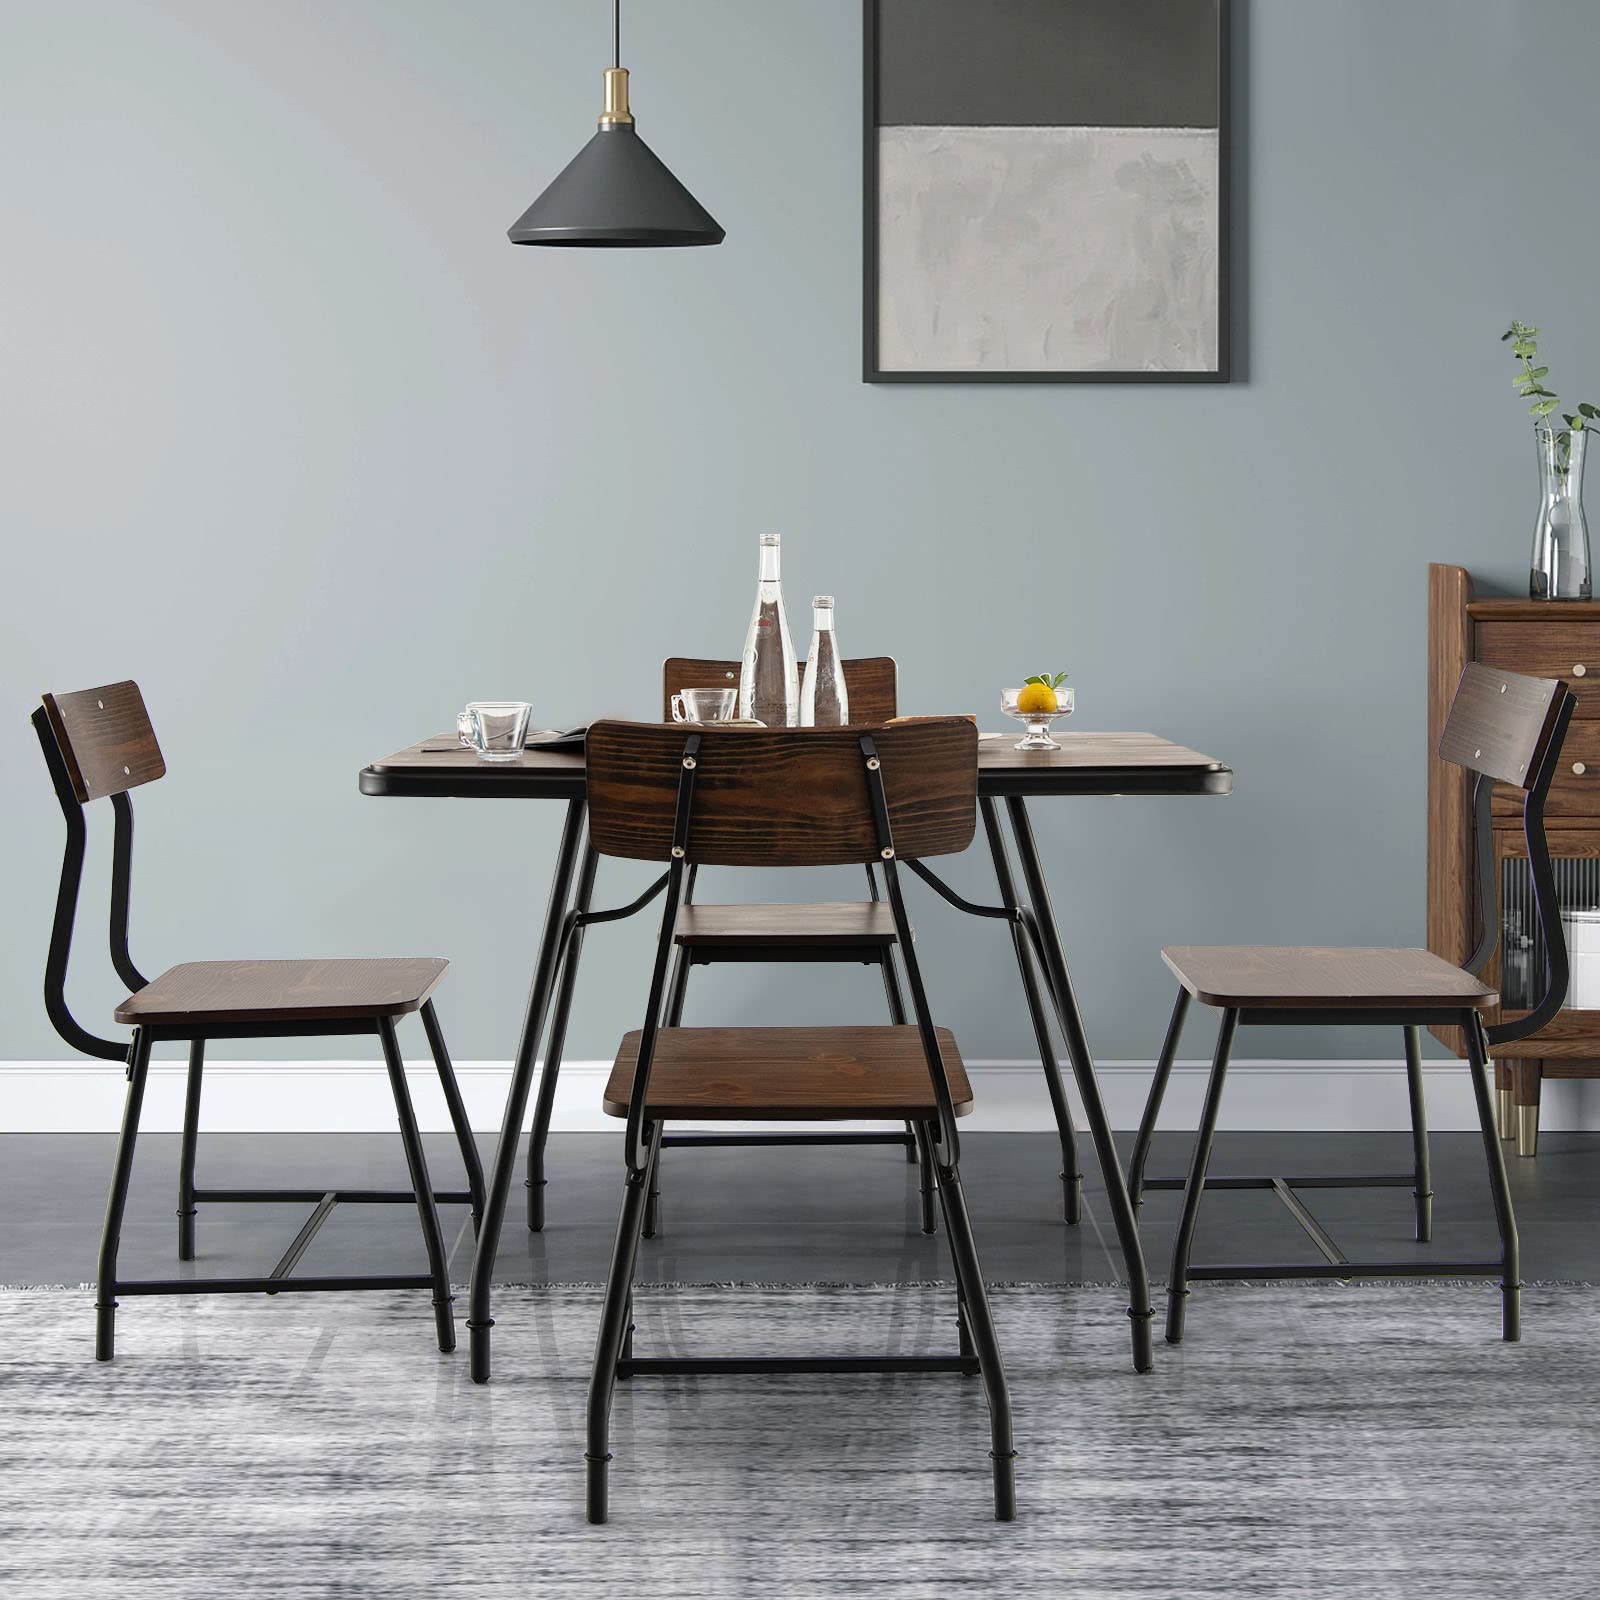 Giantex 5 Piece Dining Table Set, Rectangular Kitchen Table & 4 Chairs for 4